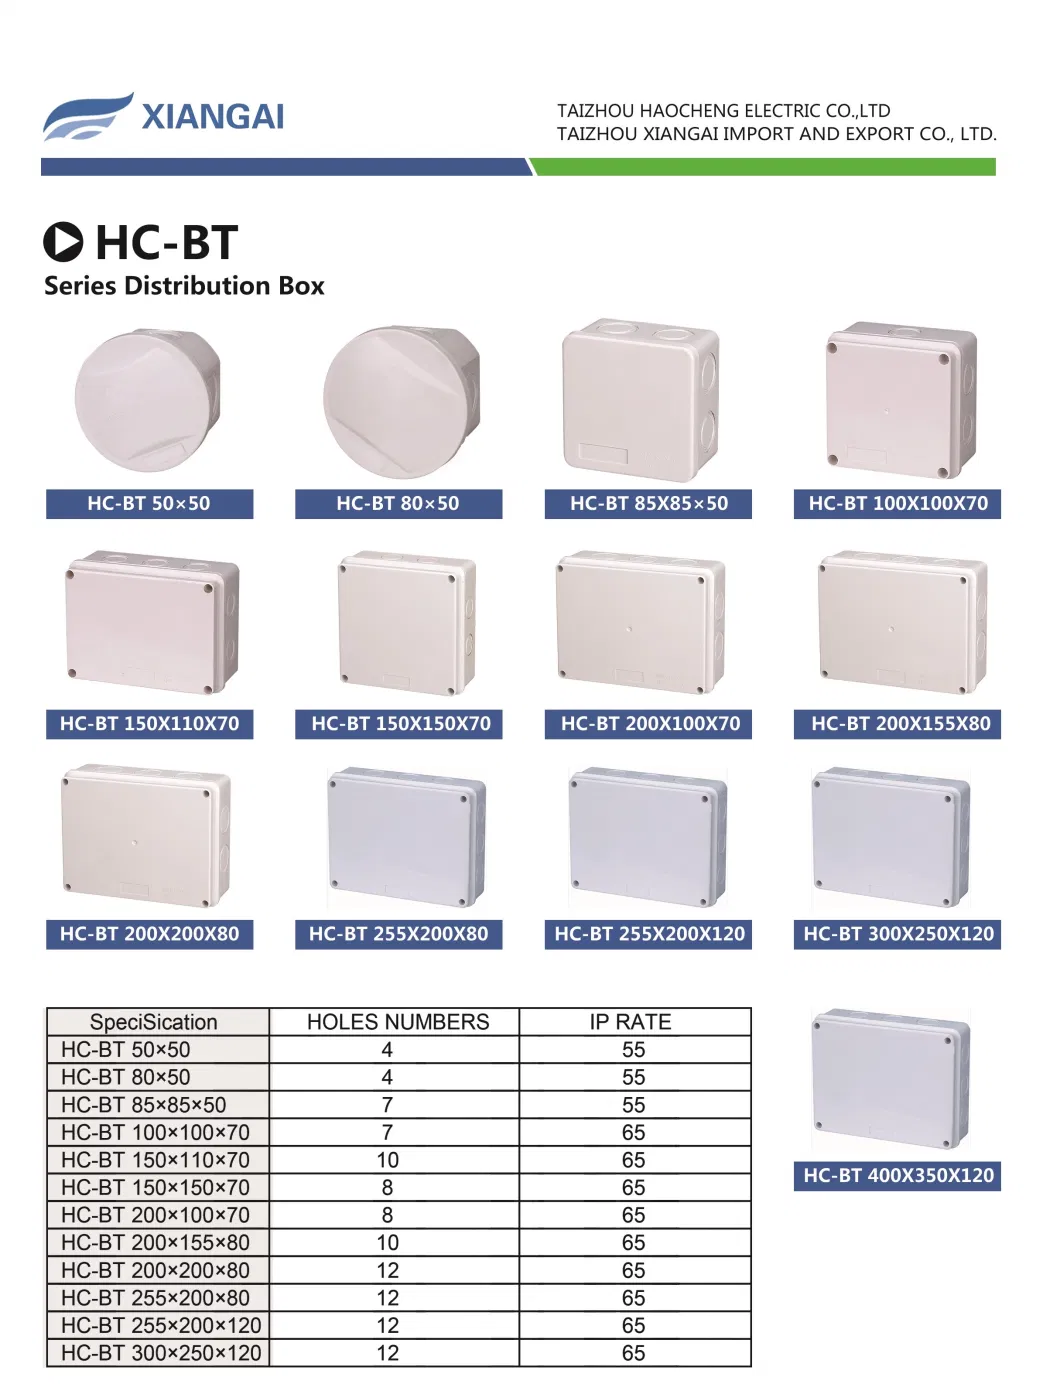 Waterproof Plastic Box Junction Box Electrical Box Switch Box Connection Box Hc-Bt100*100*70mm Manufacture